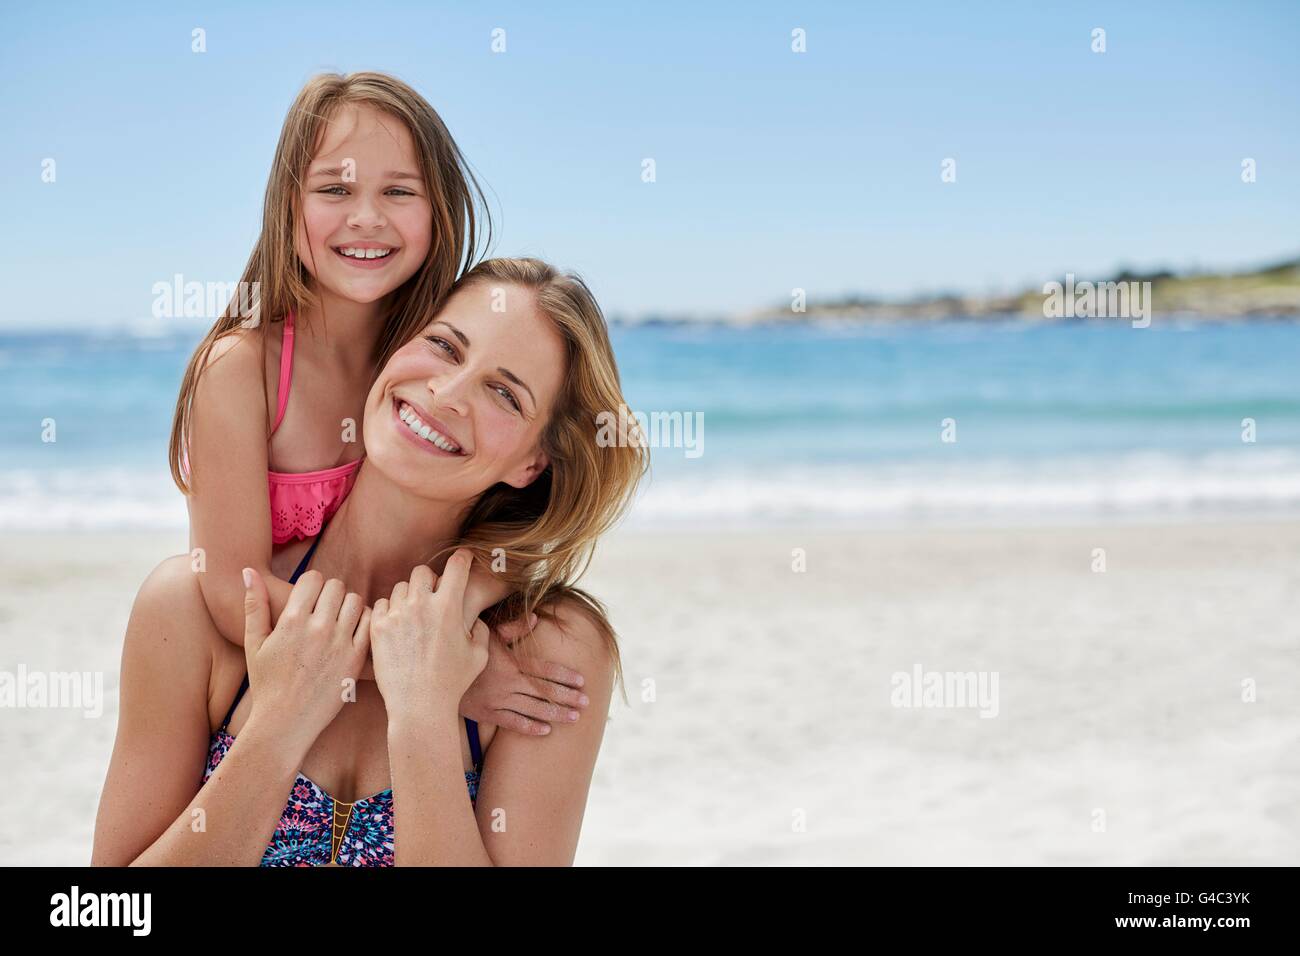 MODEL RELEASED. Mother carrying daughter on her back, portrait. Stock Photo